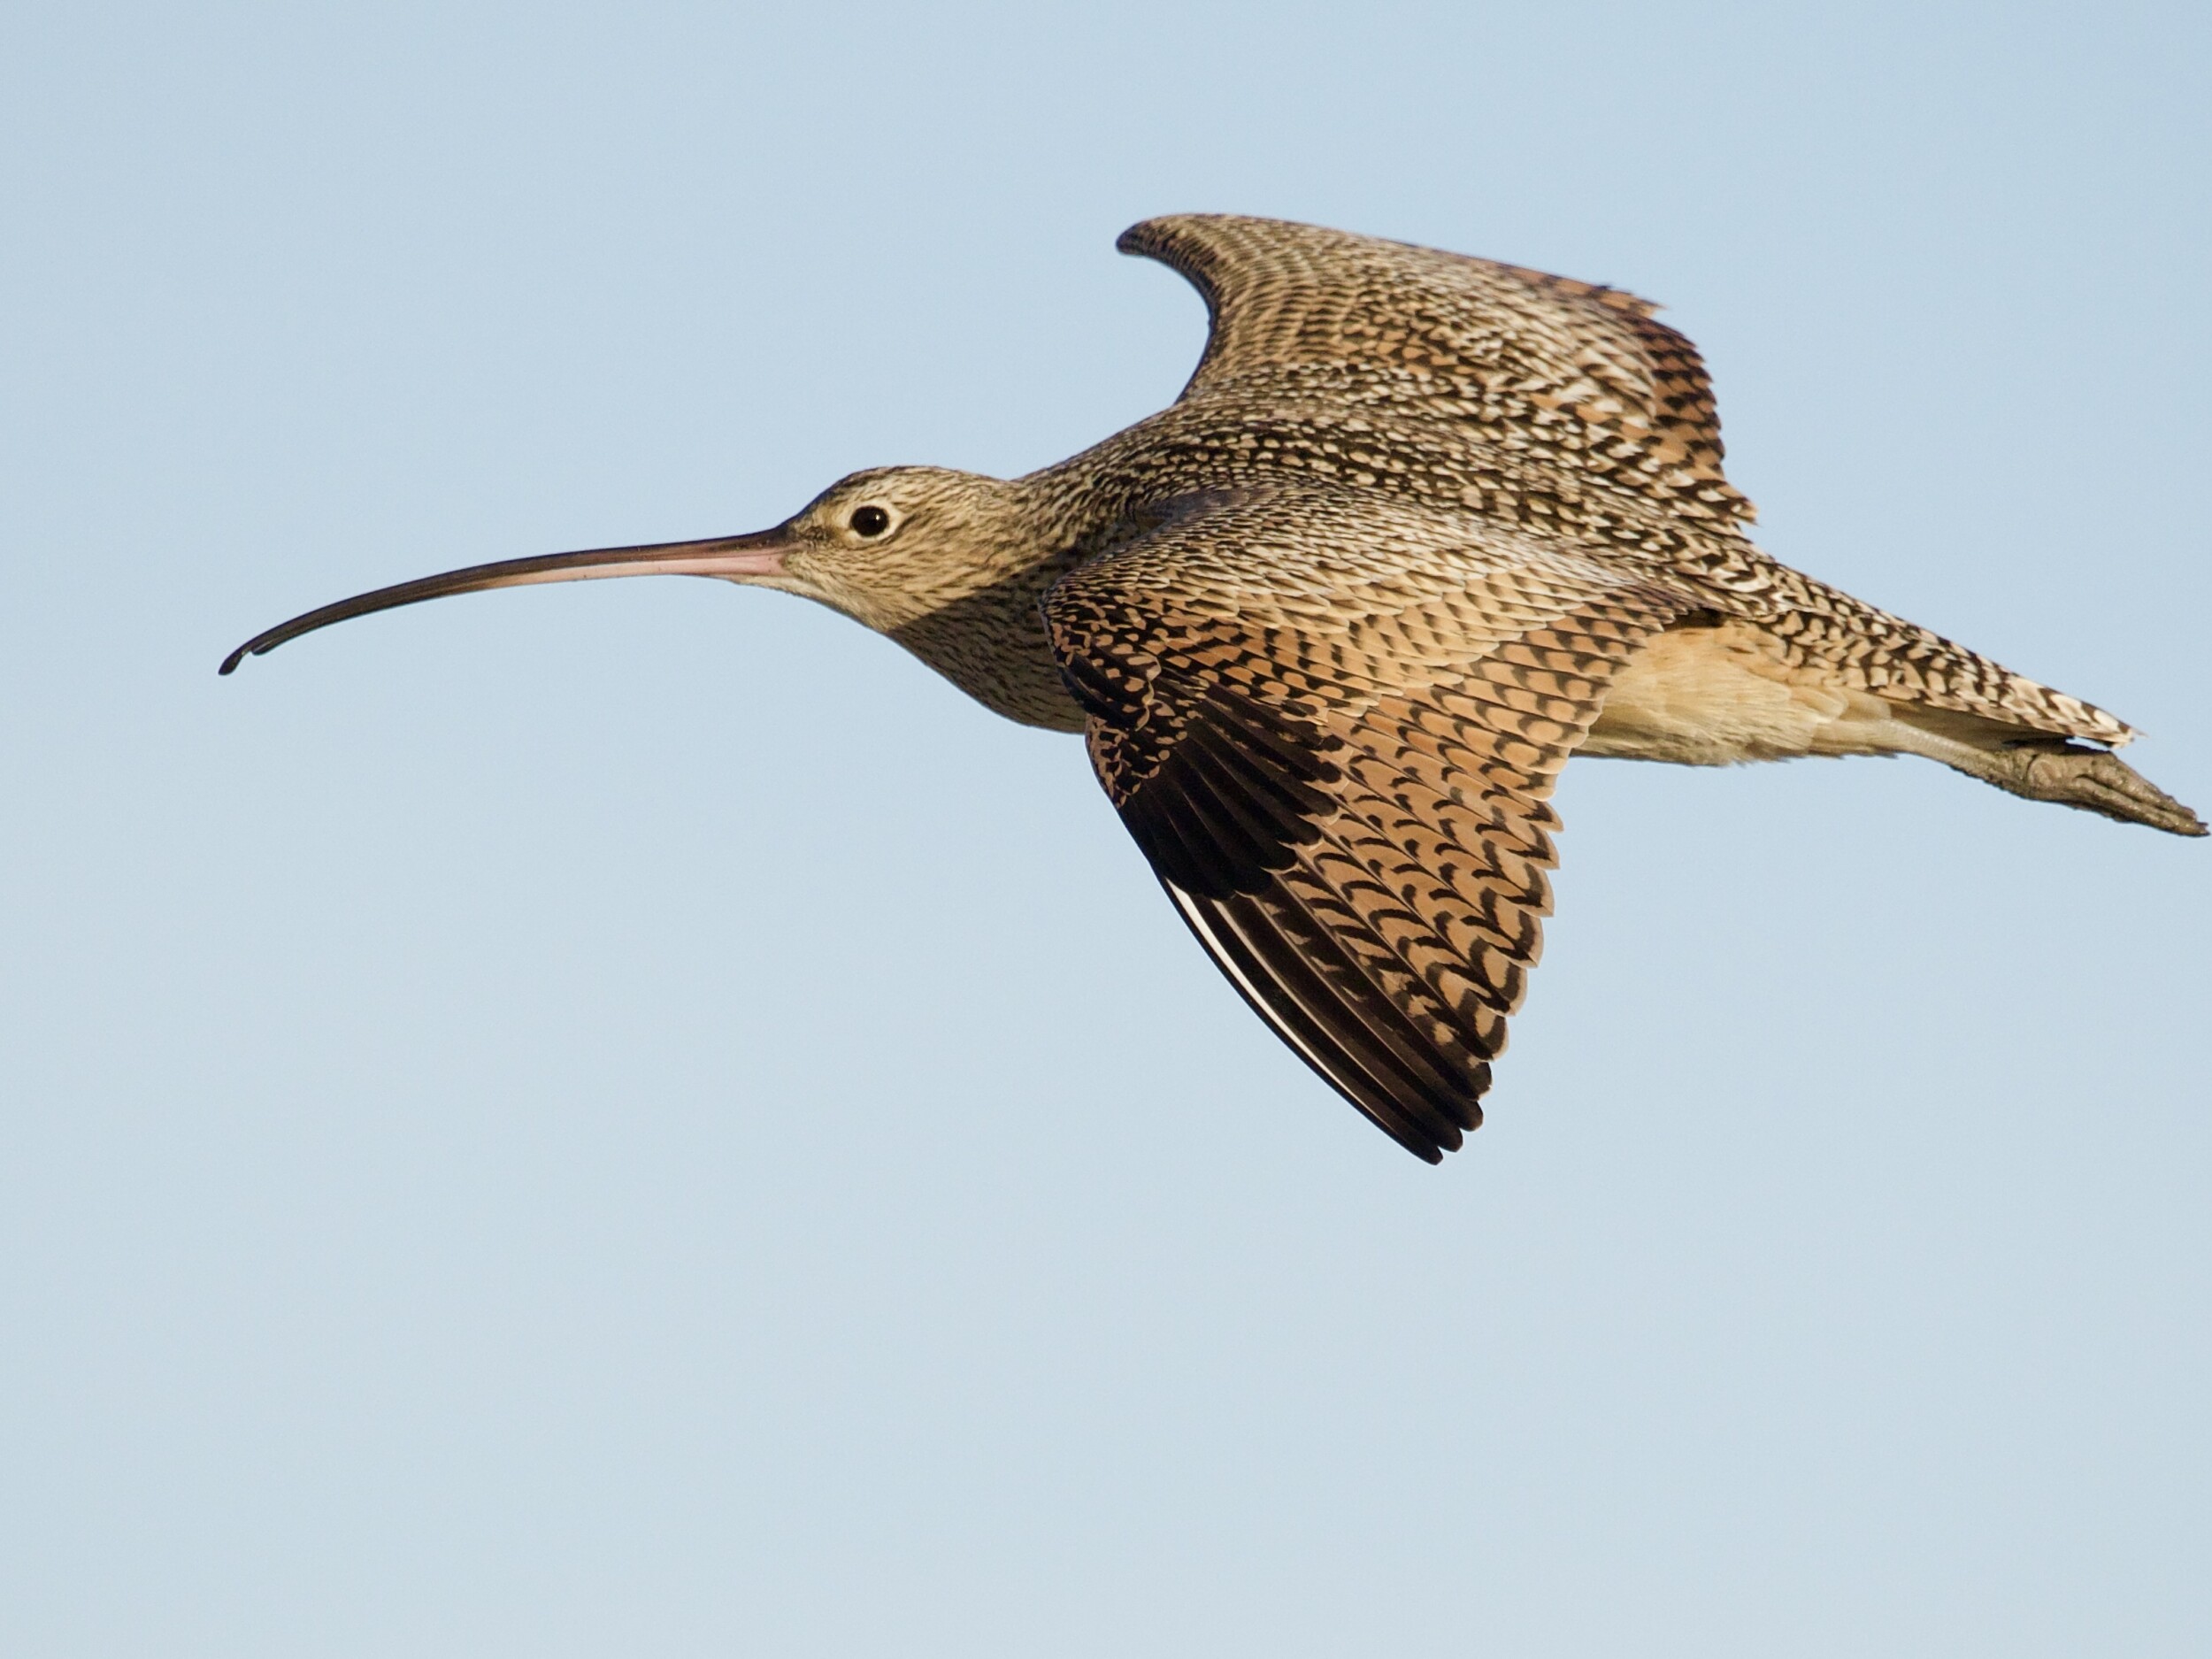 Long-billed Curlew in flight at Moss Landing